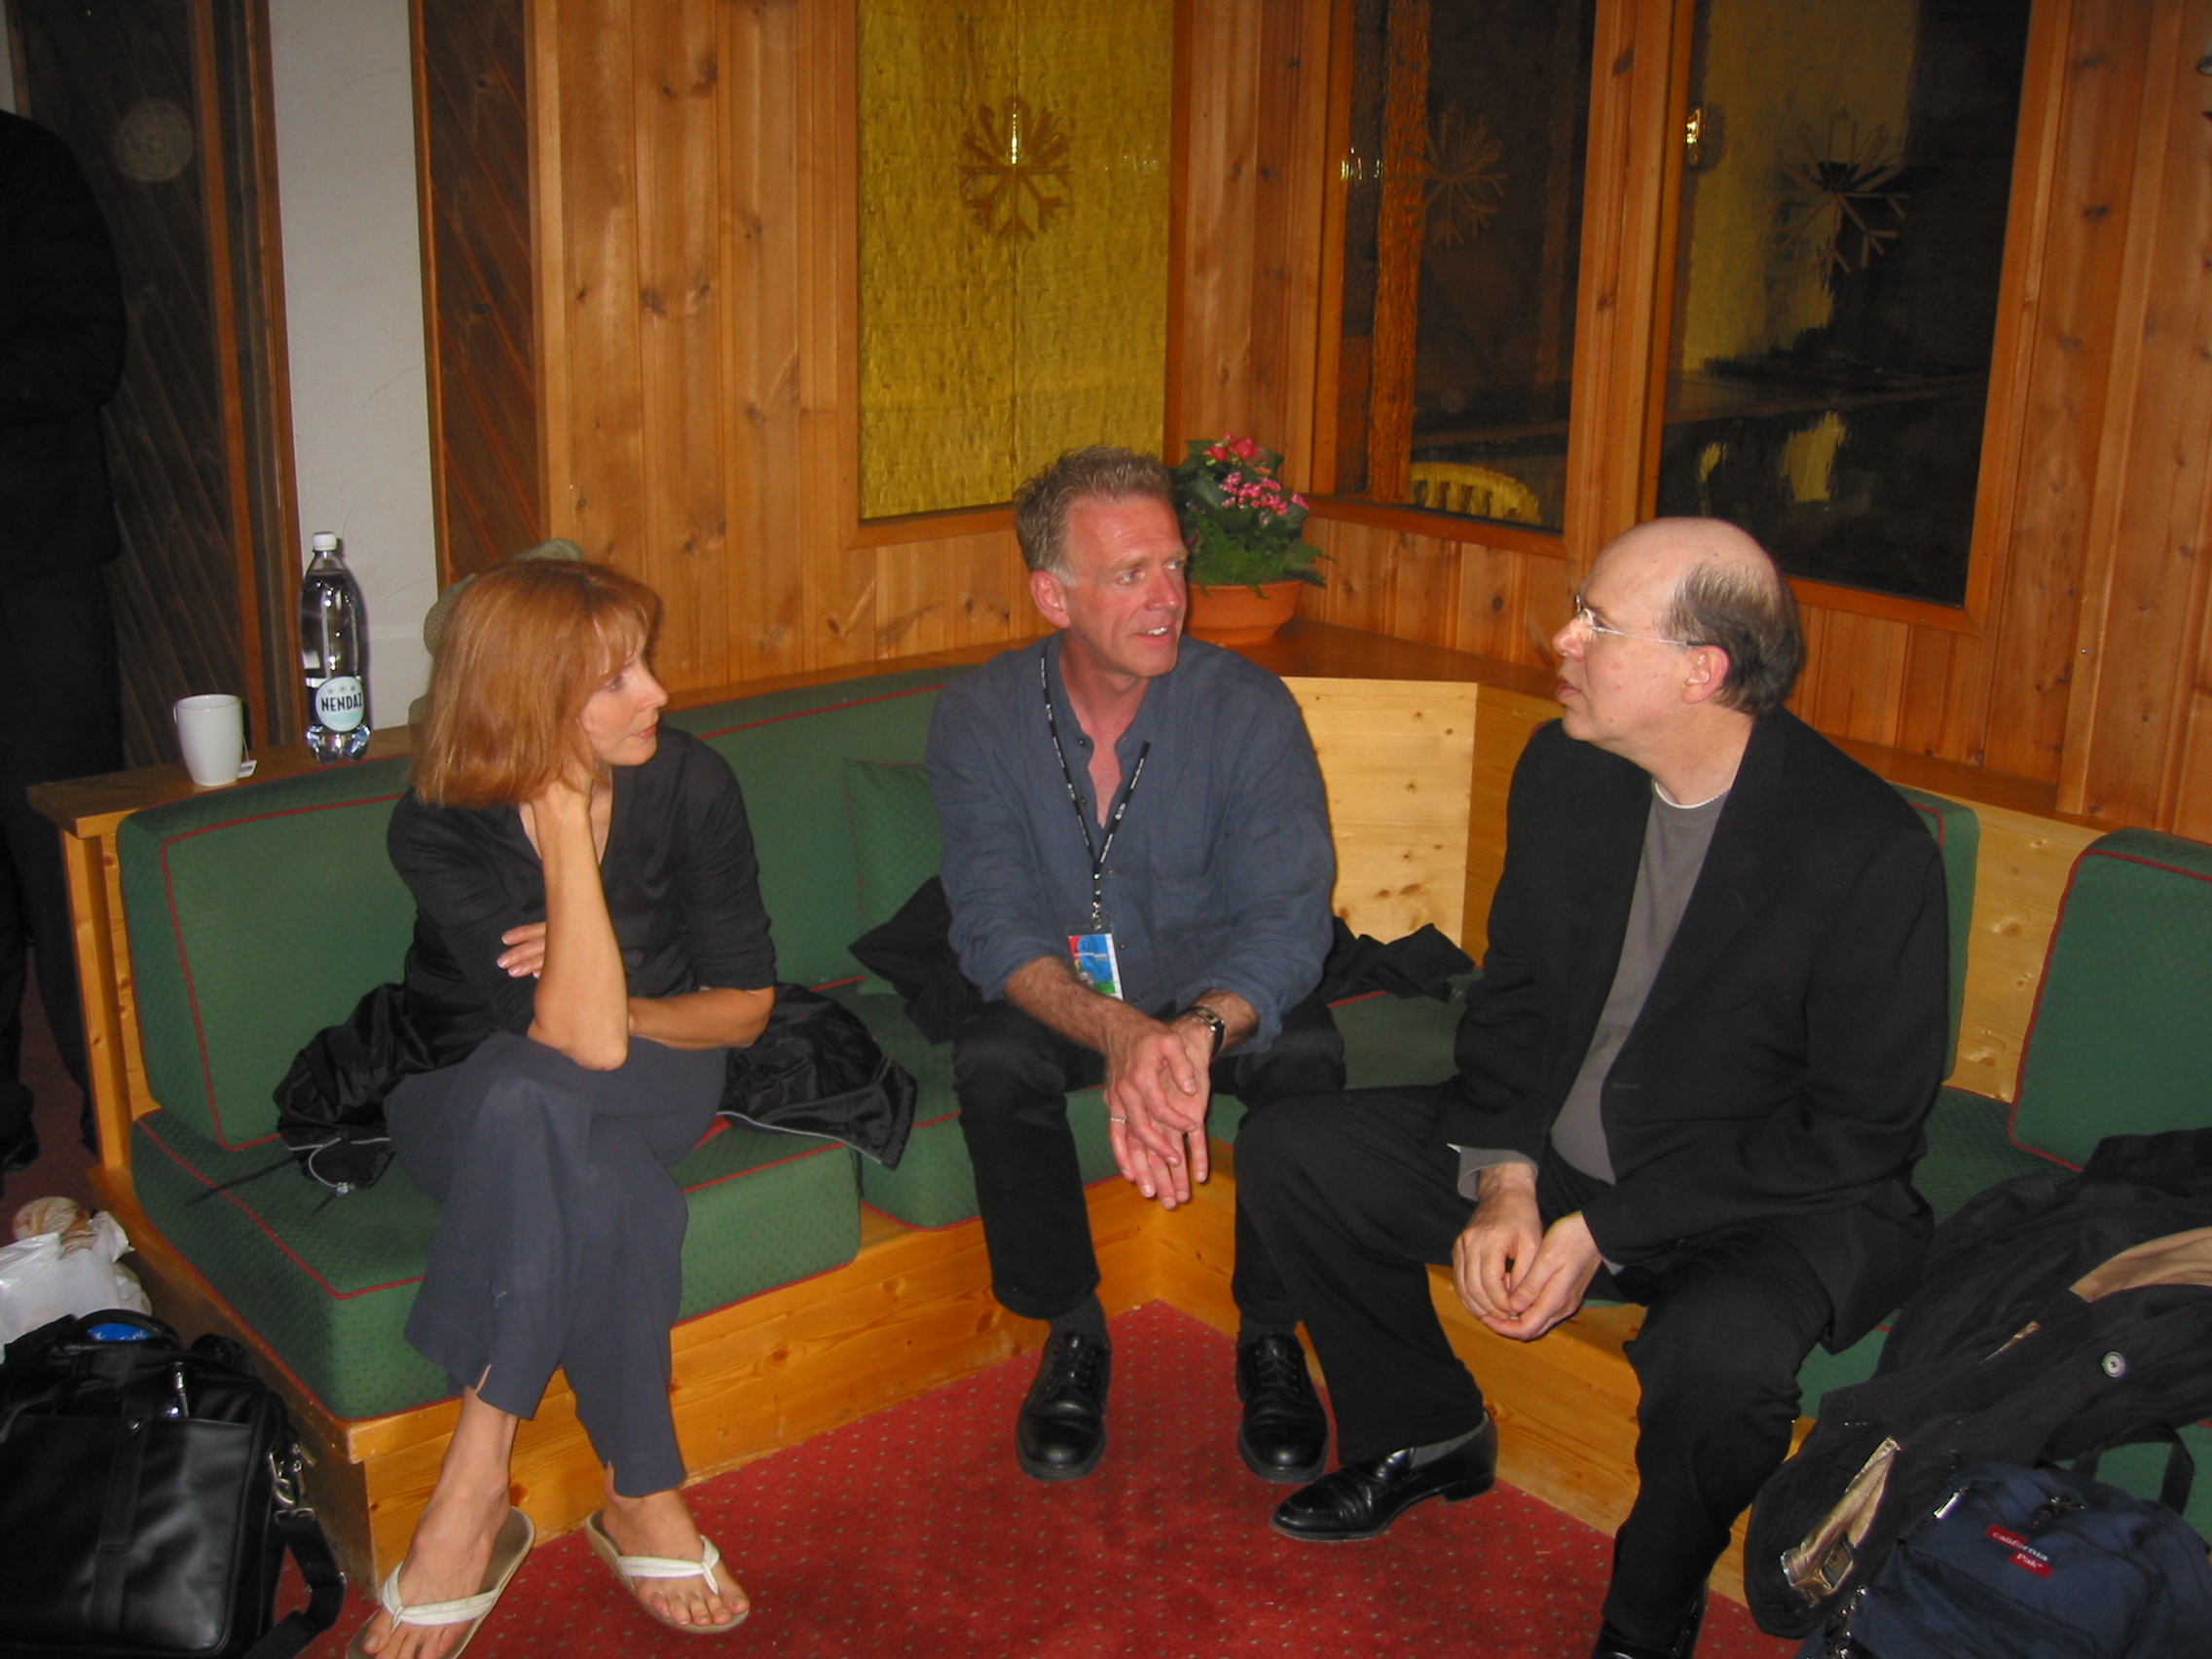 Gates McFadden, Jean-Louis Rodrigue, and Larry Moss at the Verbier Festival